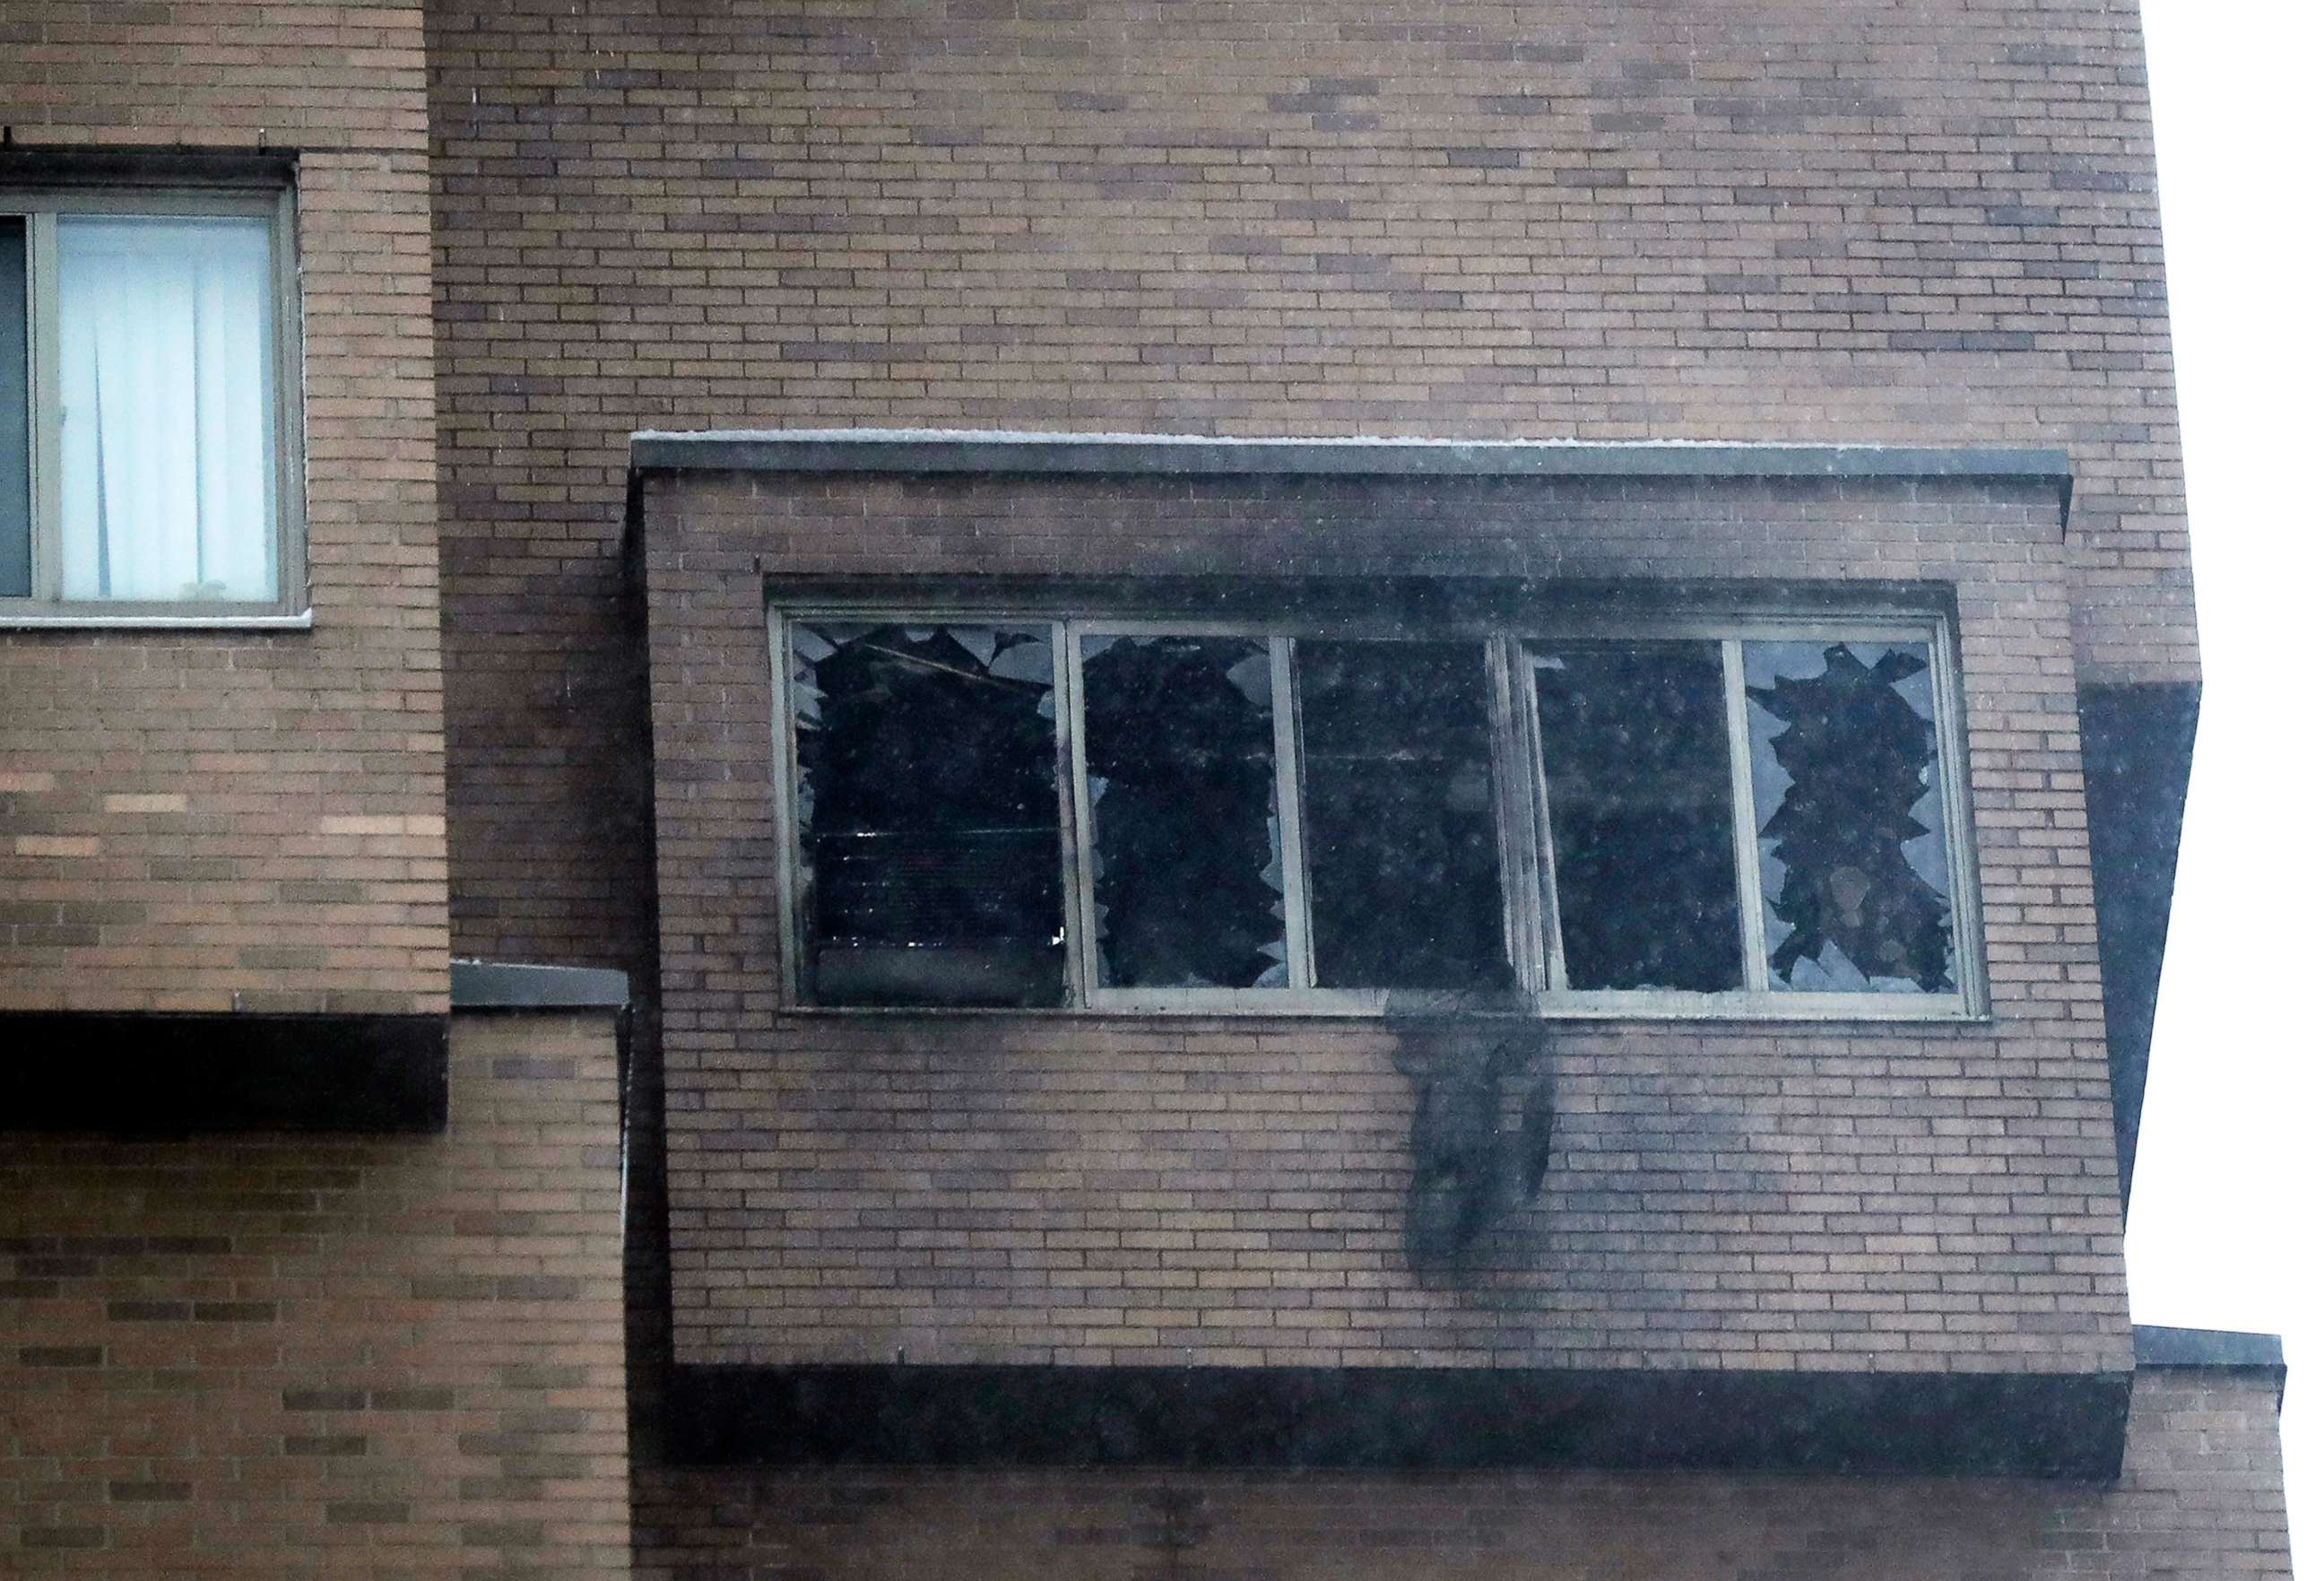 PHOTO: Broken windows and damage remain after a fire at the high-rise apartment building  Nov. 27, 2019, in Minneapolis.